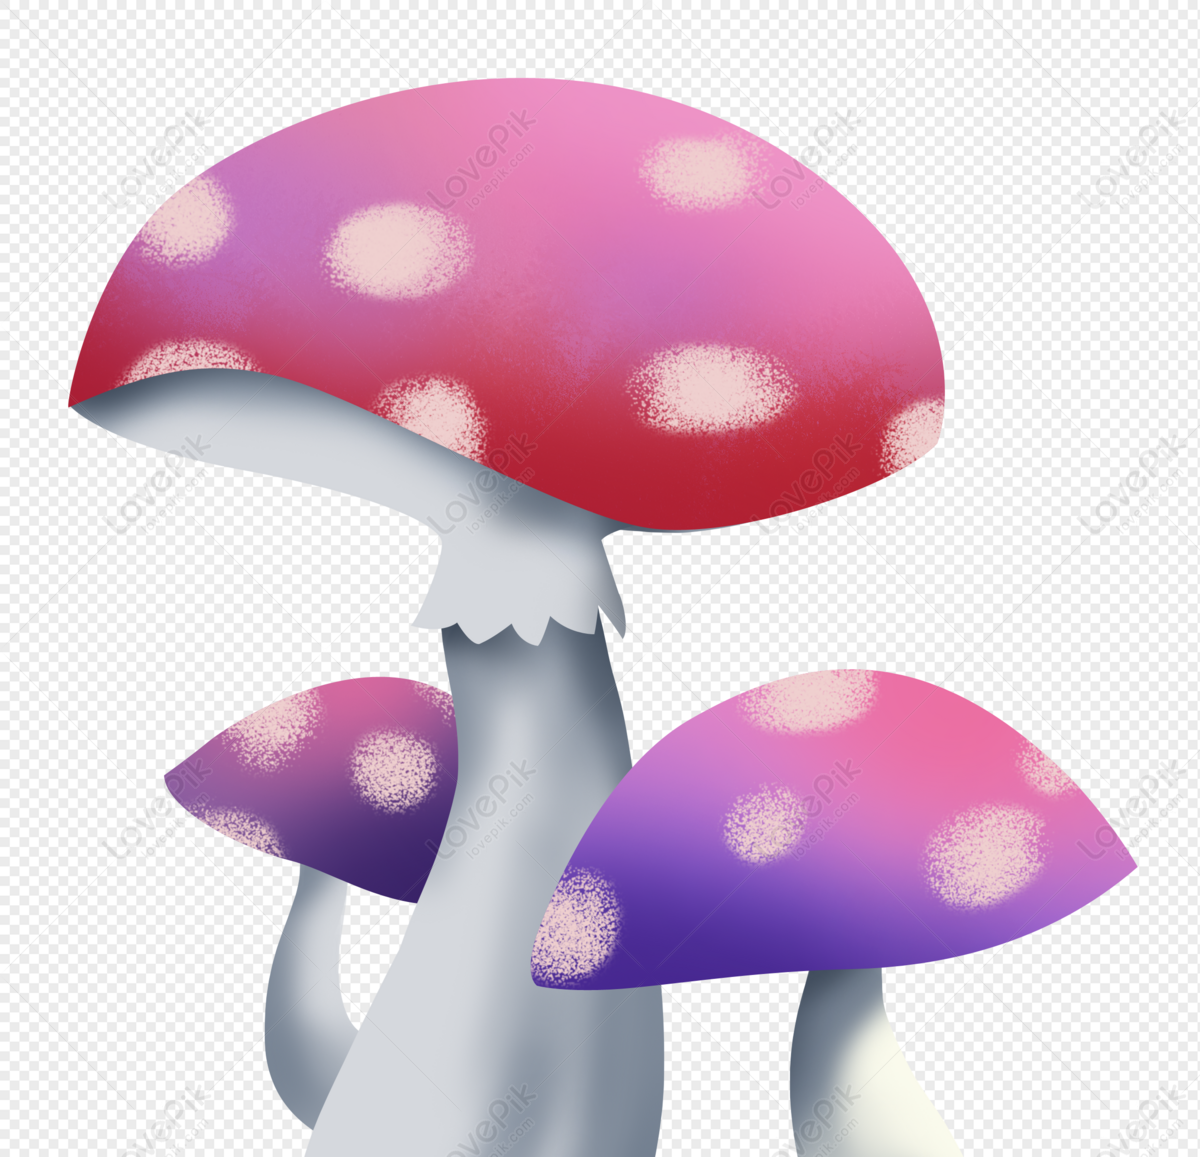 Cartoon Mushroom PNG Transparent And Clipart Image For Free Download -  Lovepik | 400290516